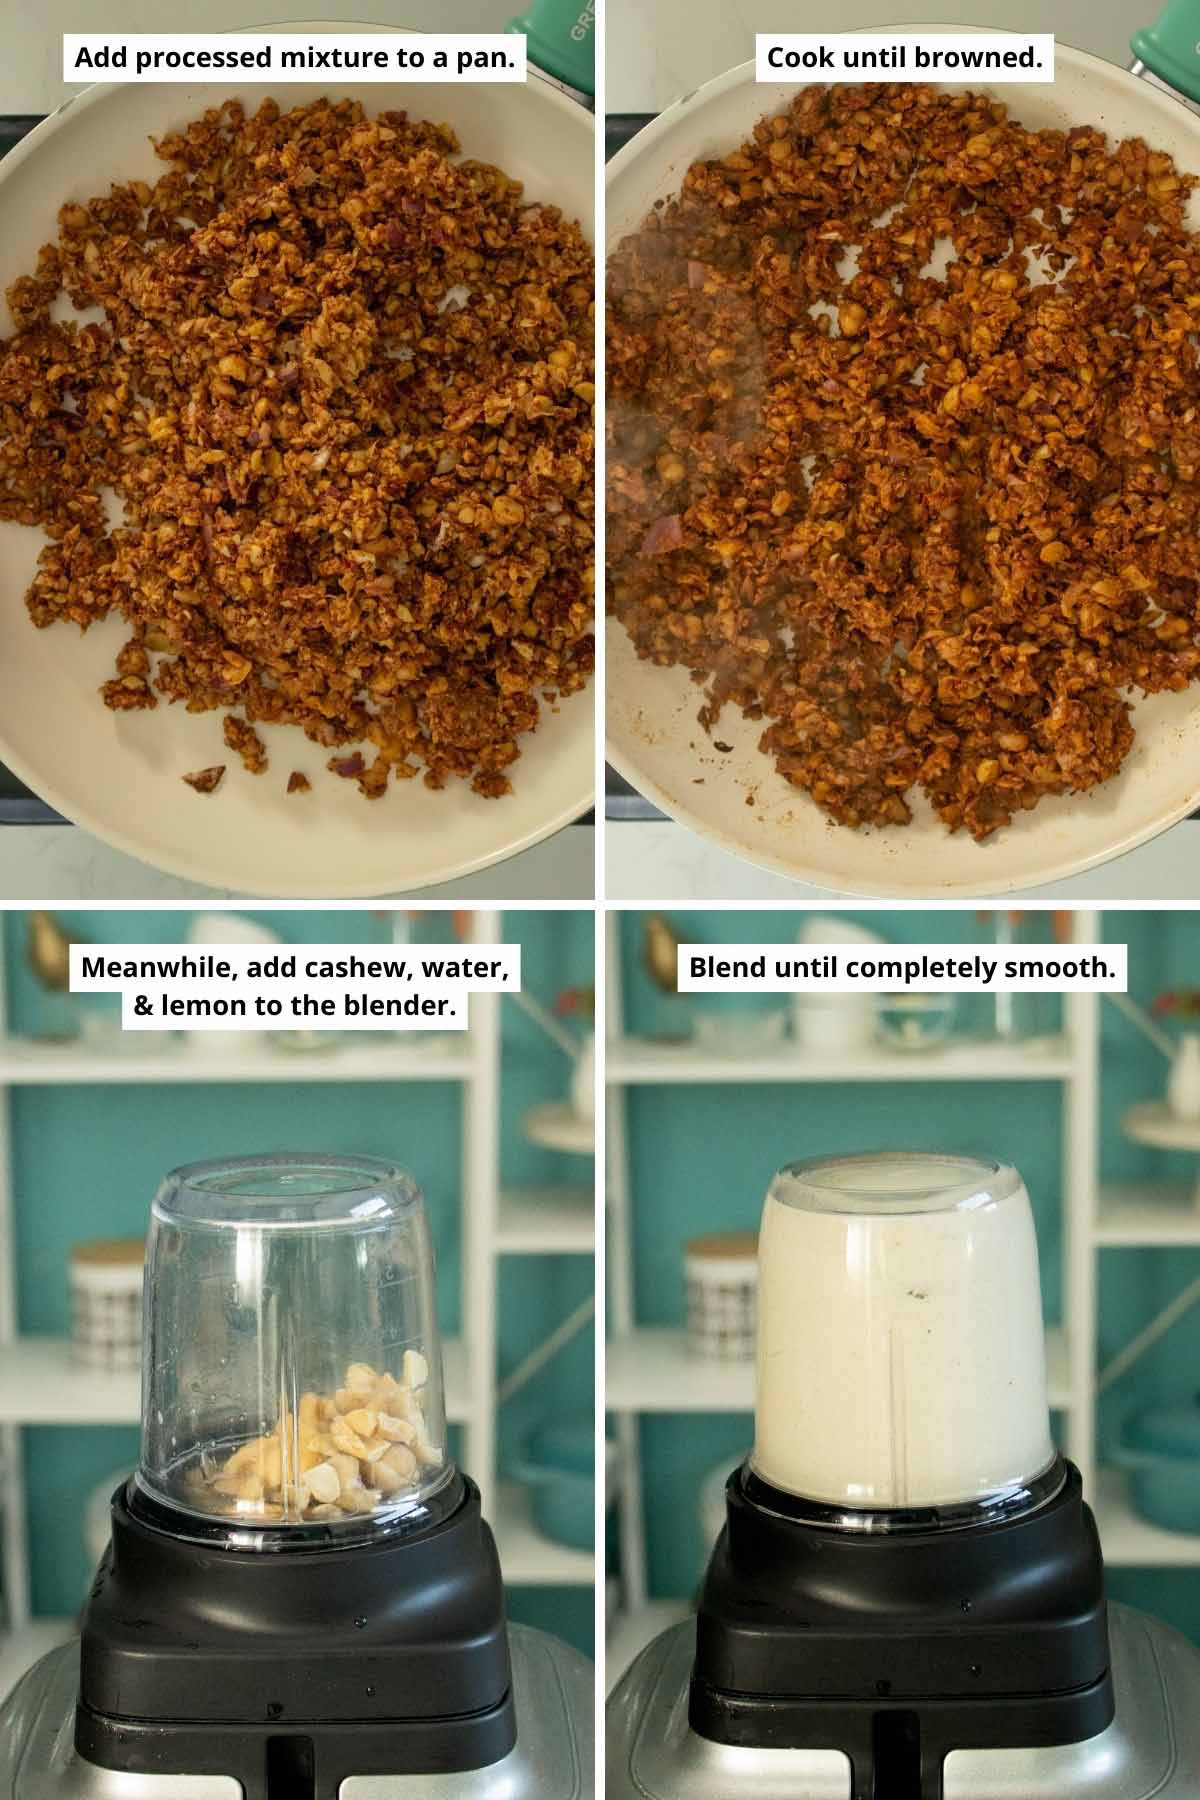 image collage showing the chorizo in the pan before and after cooking and the cashew cream ingredients in the blender before and after blending